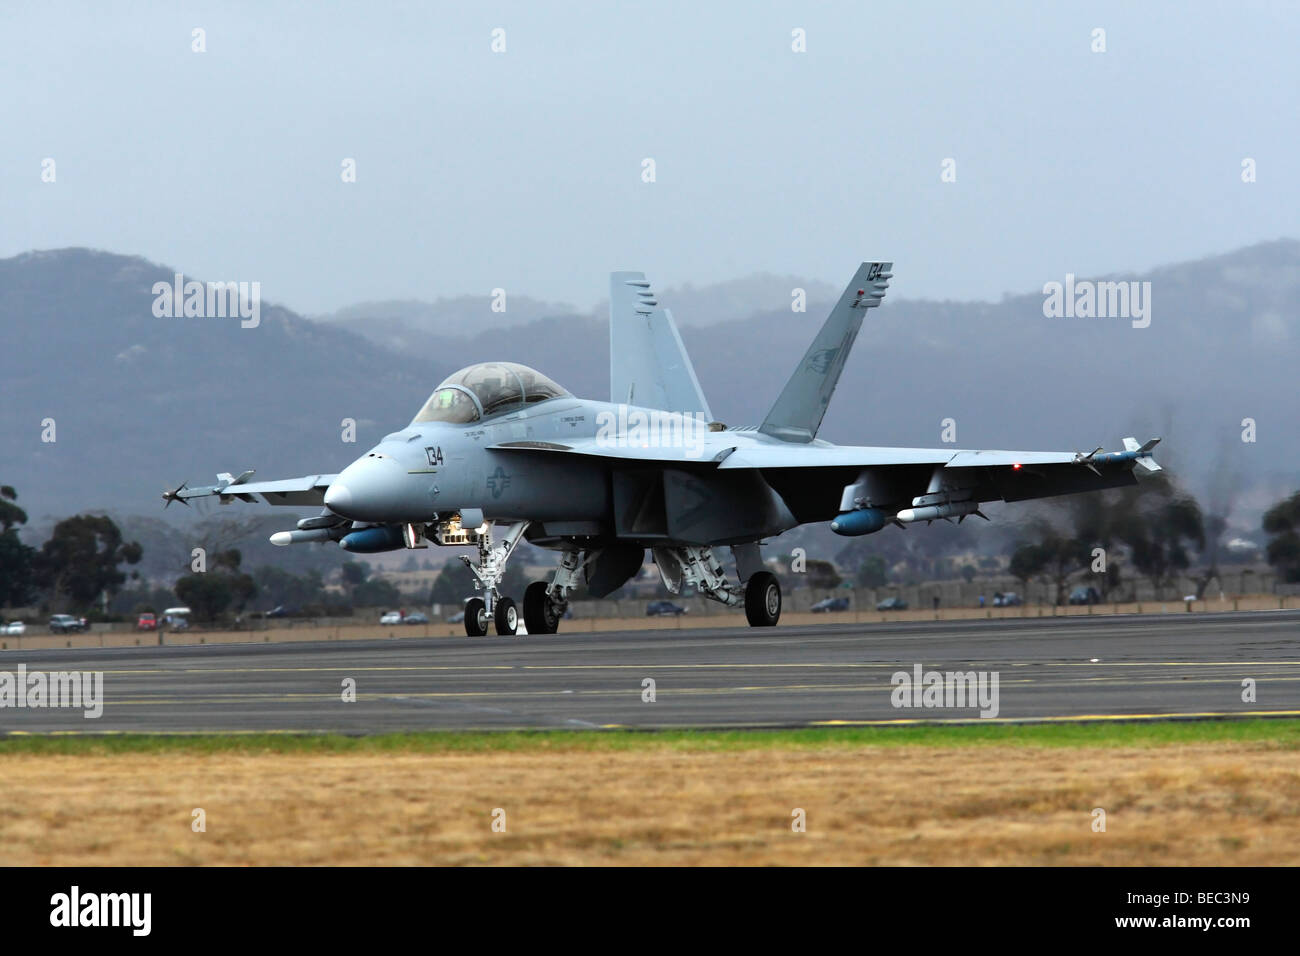 F/A-18 Super Hornet Jet Fighter on Runway Stock Photo